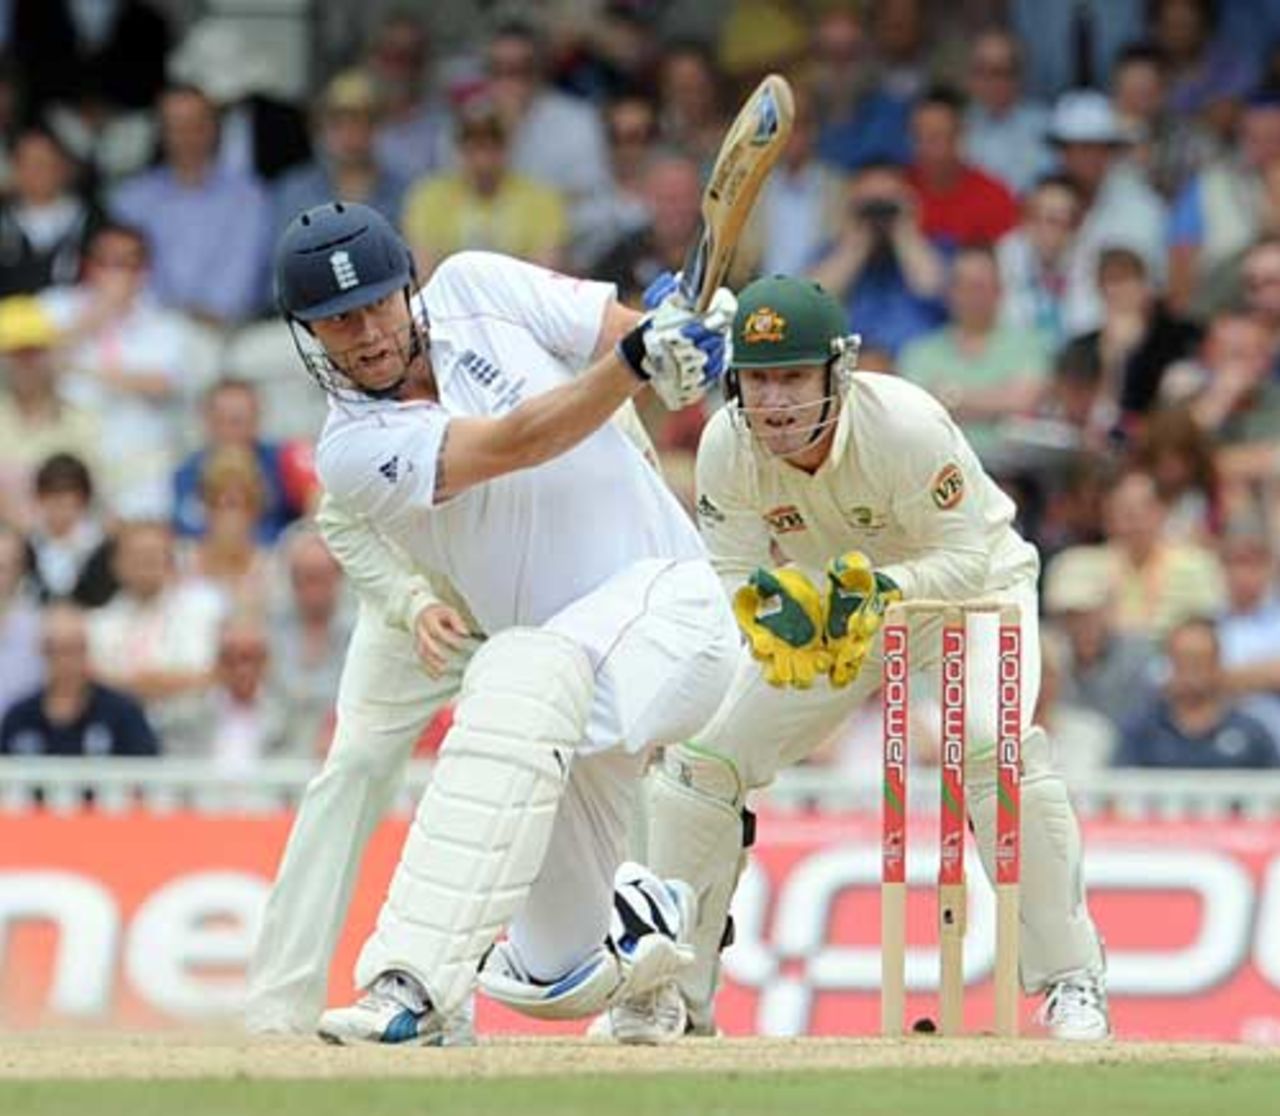 Andrew Flintoff clubs through the leg side during his brief - but fun - final Test innings, England v Australia, 5th Test, The Oval, 3rd day, August 22, 2009